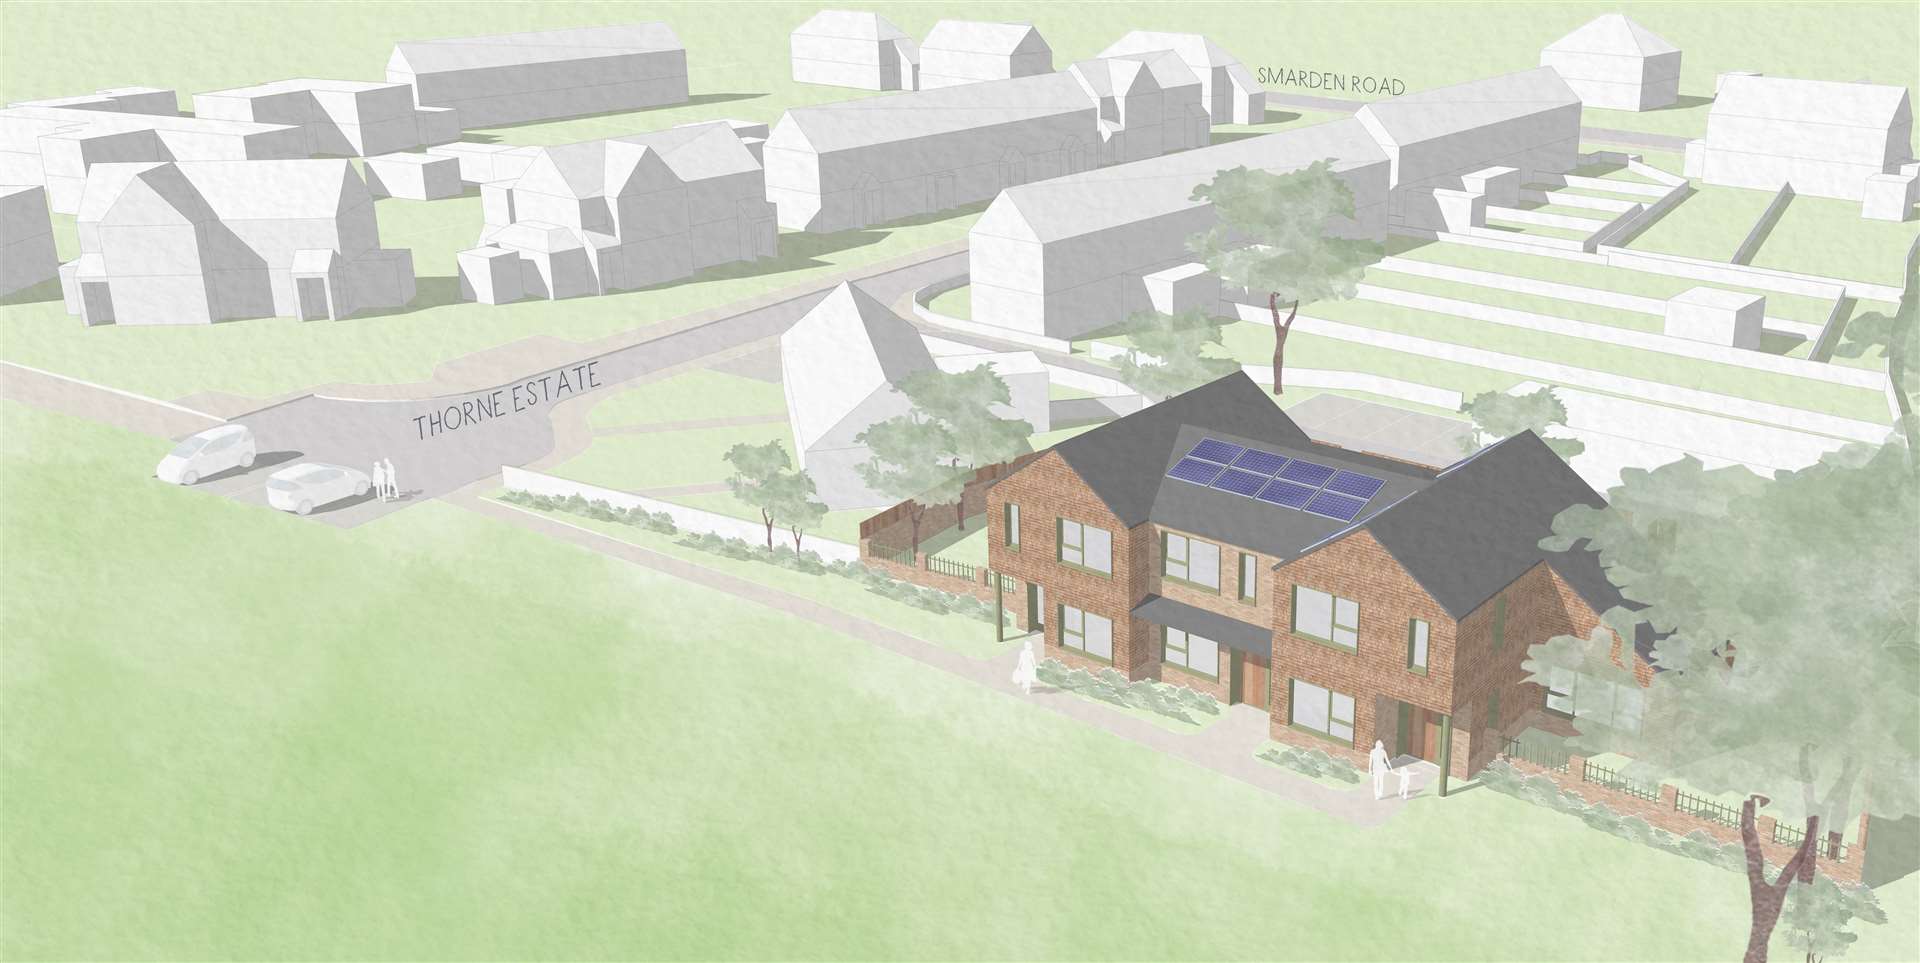 Three affordable homes will be built if the project gets the green light